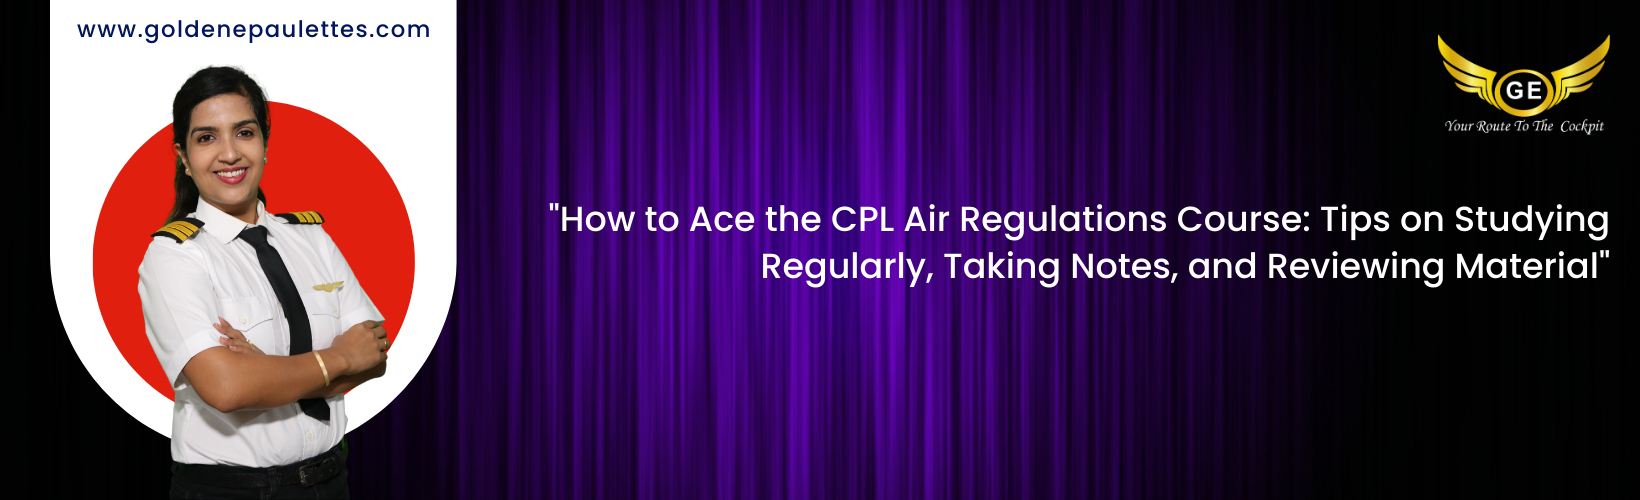 What to Expect During an Air Regulations Course Exam